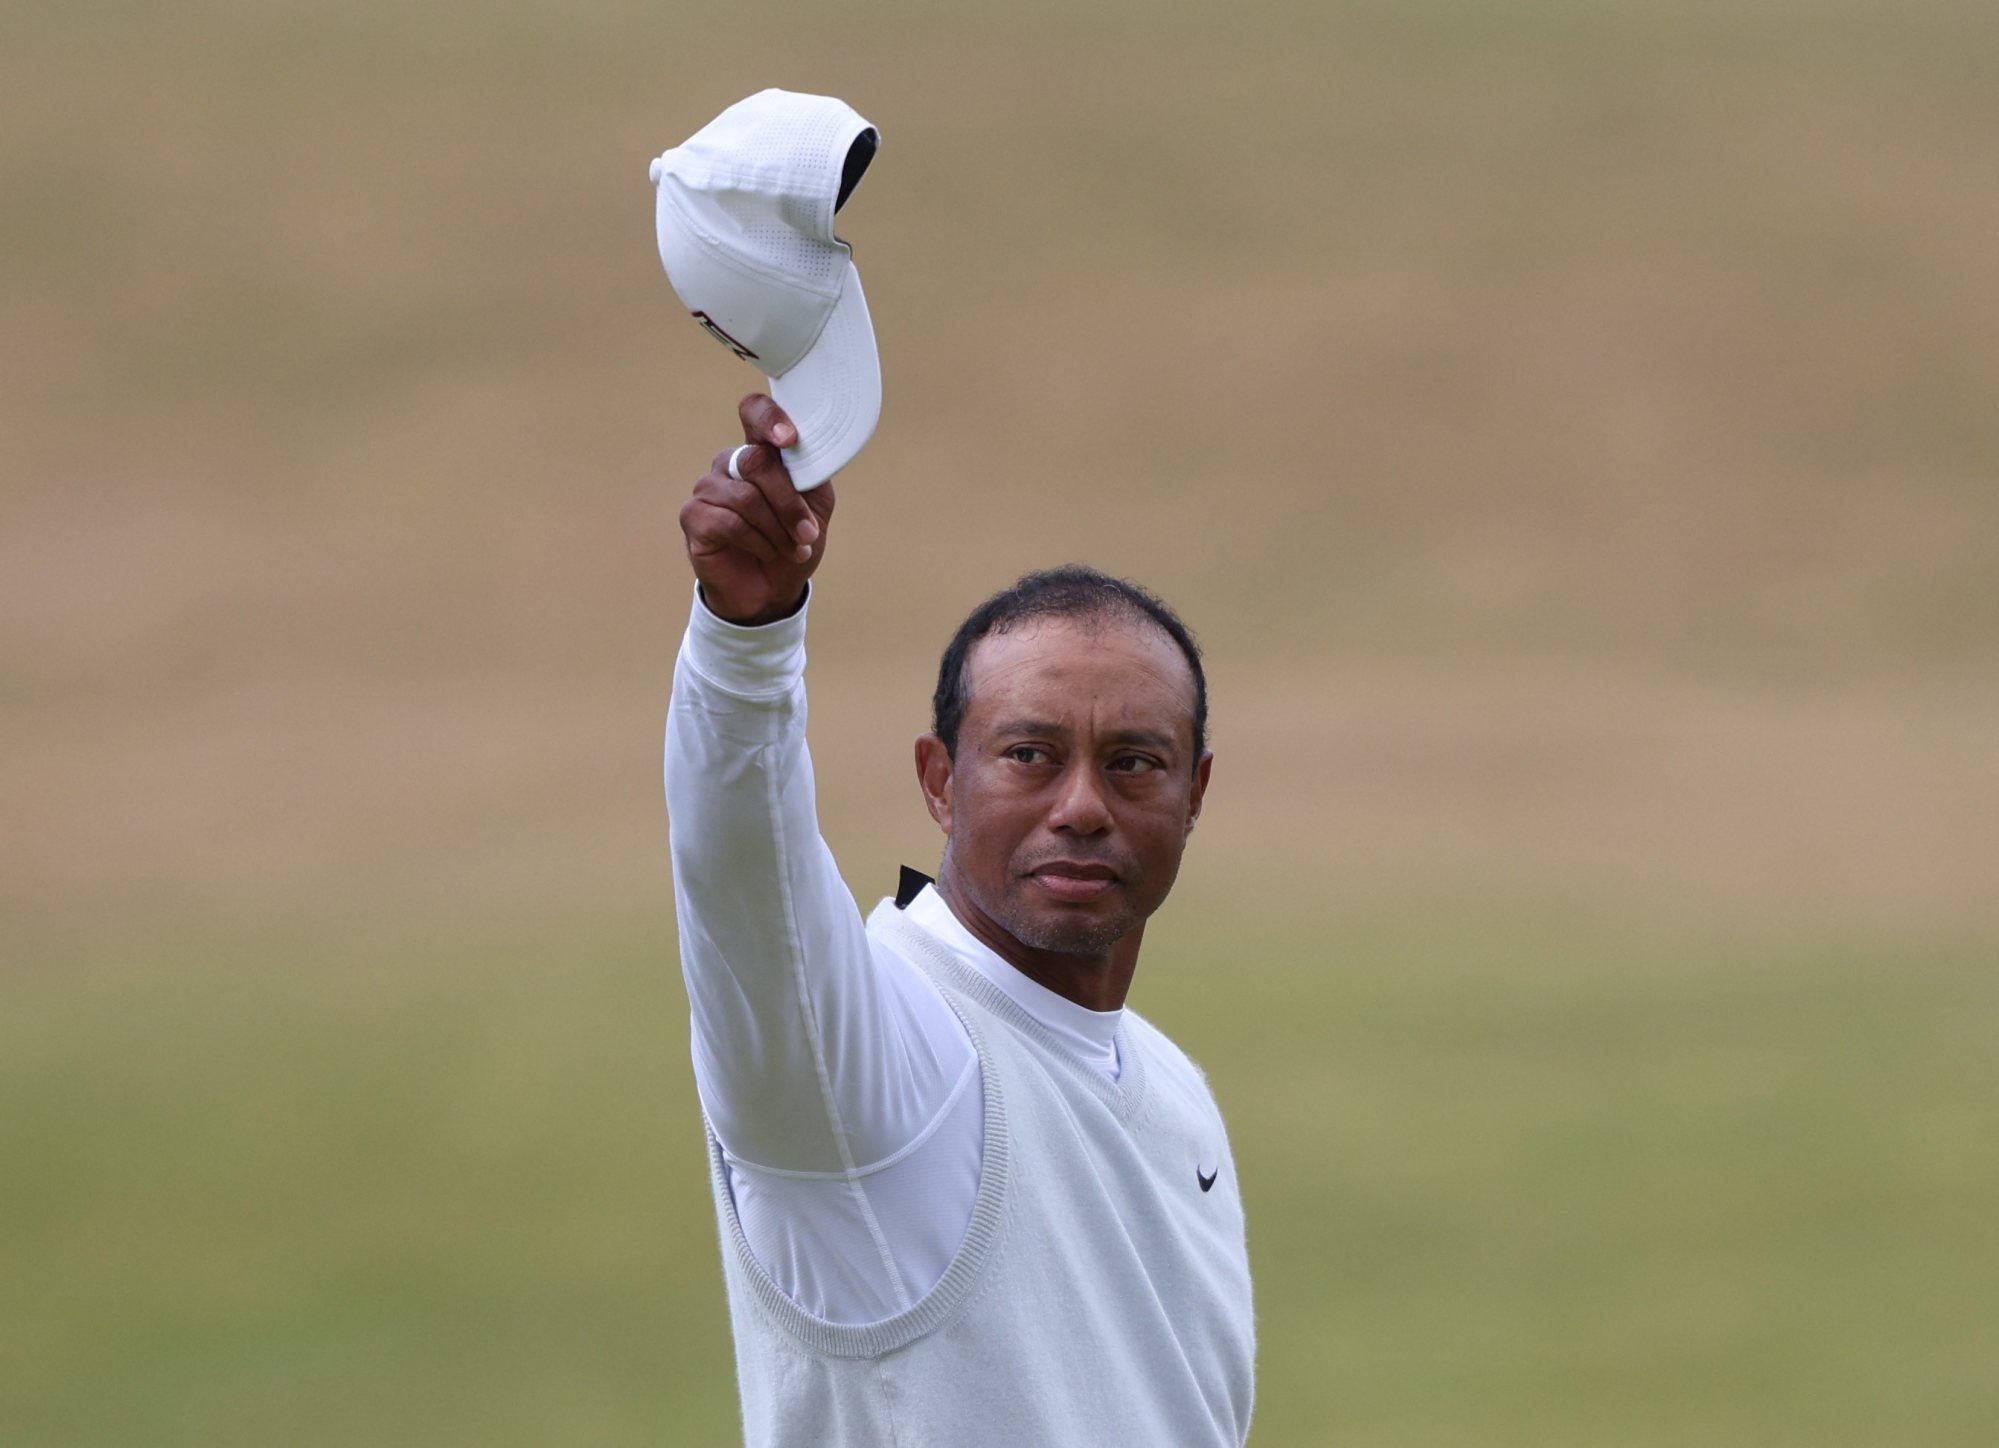 Tiger Woods was given the cold shoulder by the likes of AT&T and Gillette after it was revealed he’d been cheating on his wife with several other women. Photo: Reuters